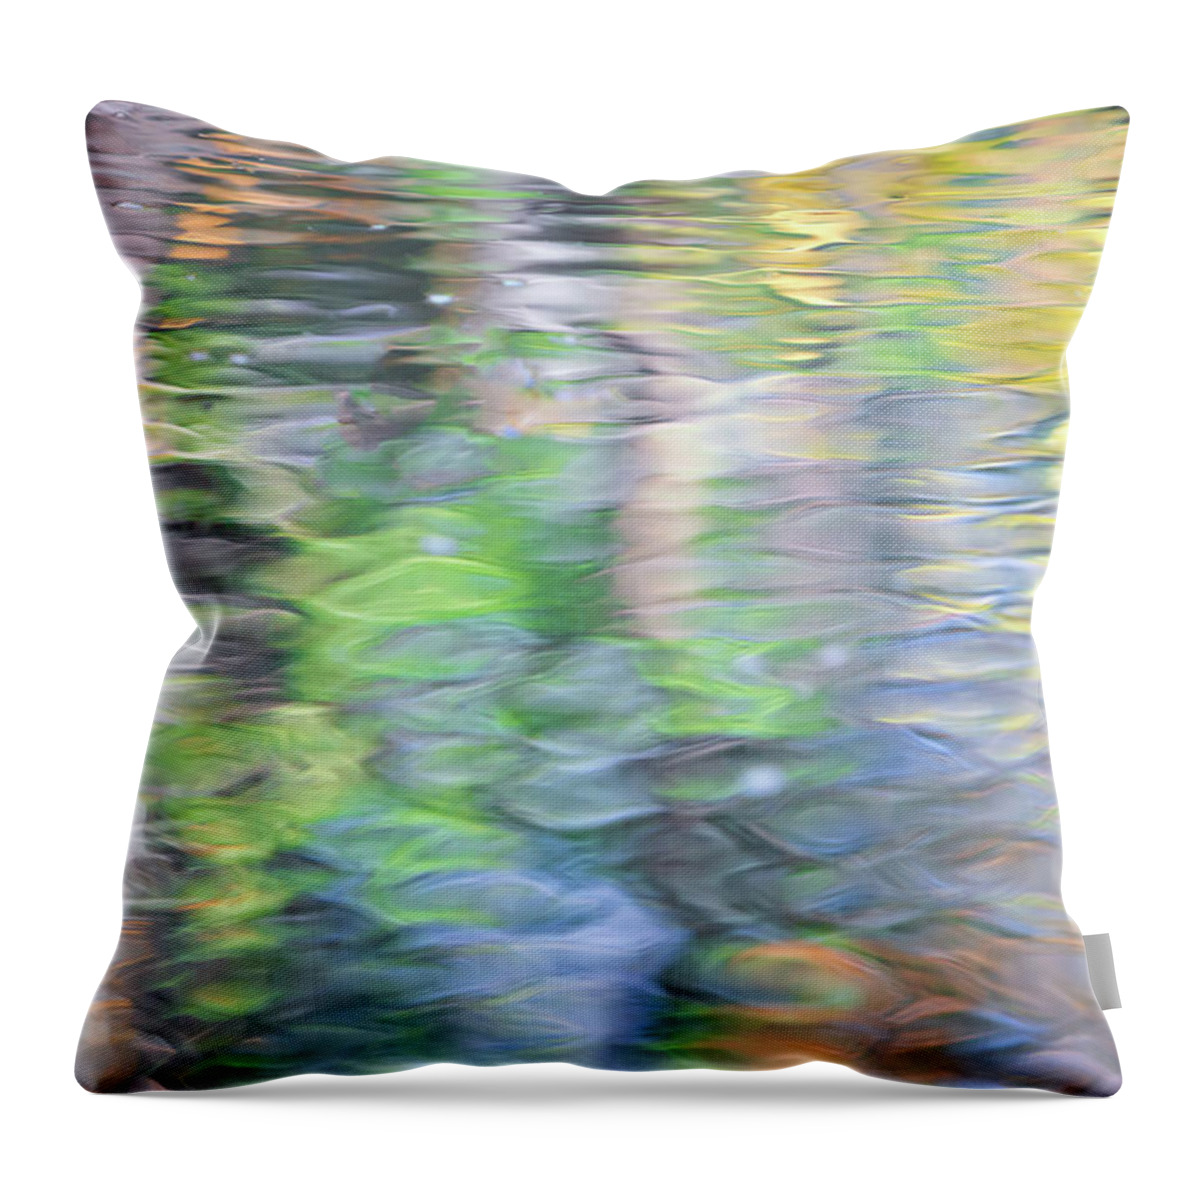 Yosemite Throw Pillow featuring the photograph Merced River Reflections 9 by Larry Marshall